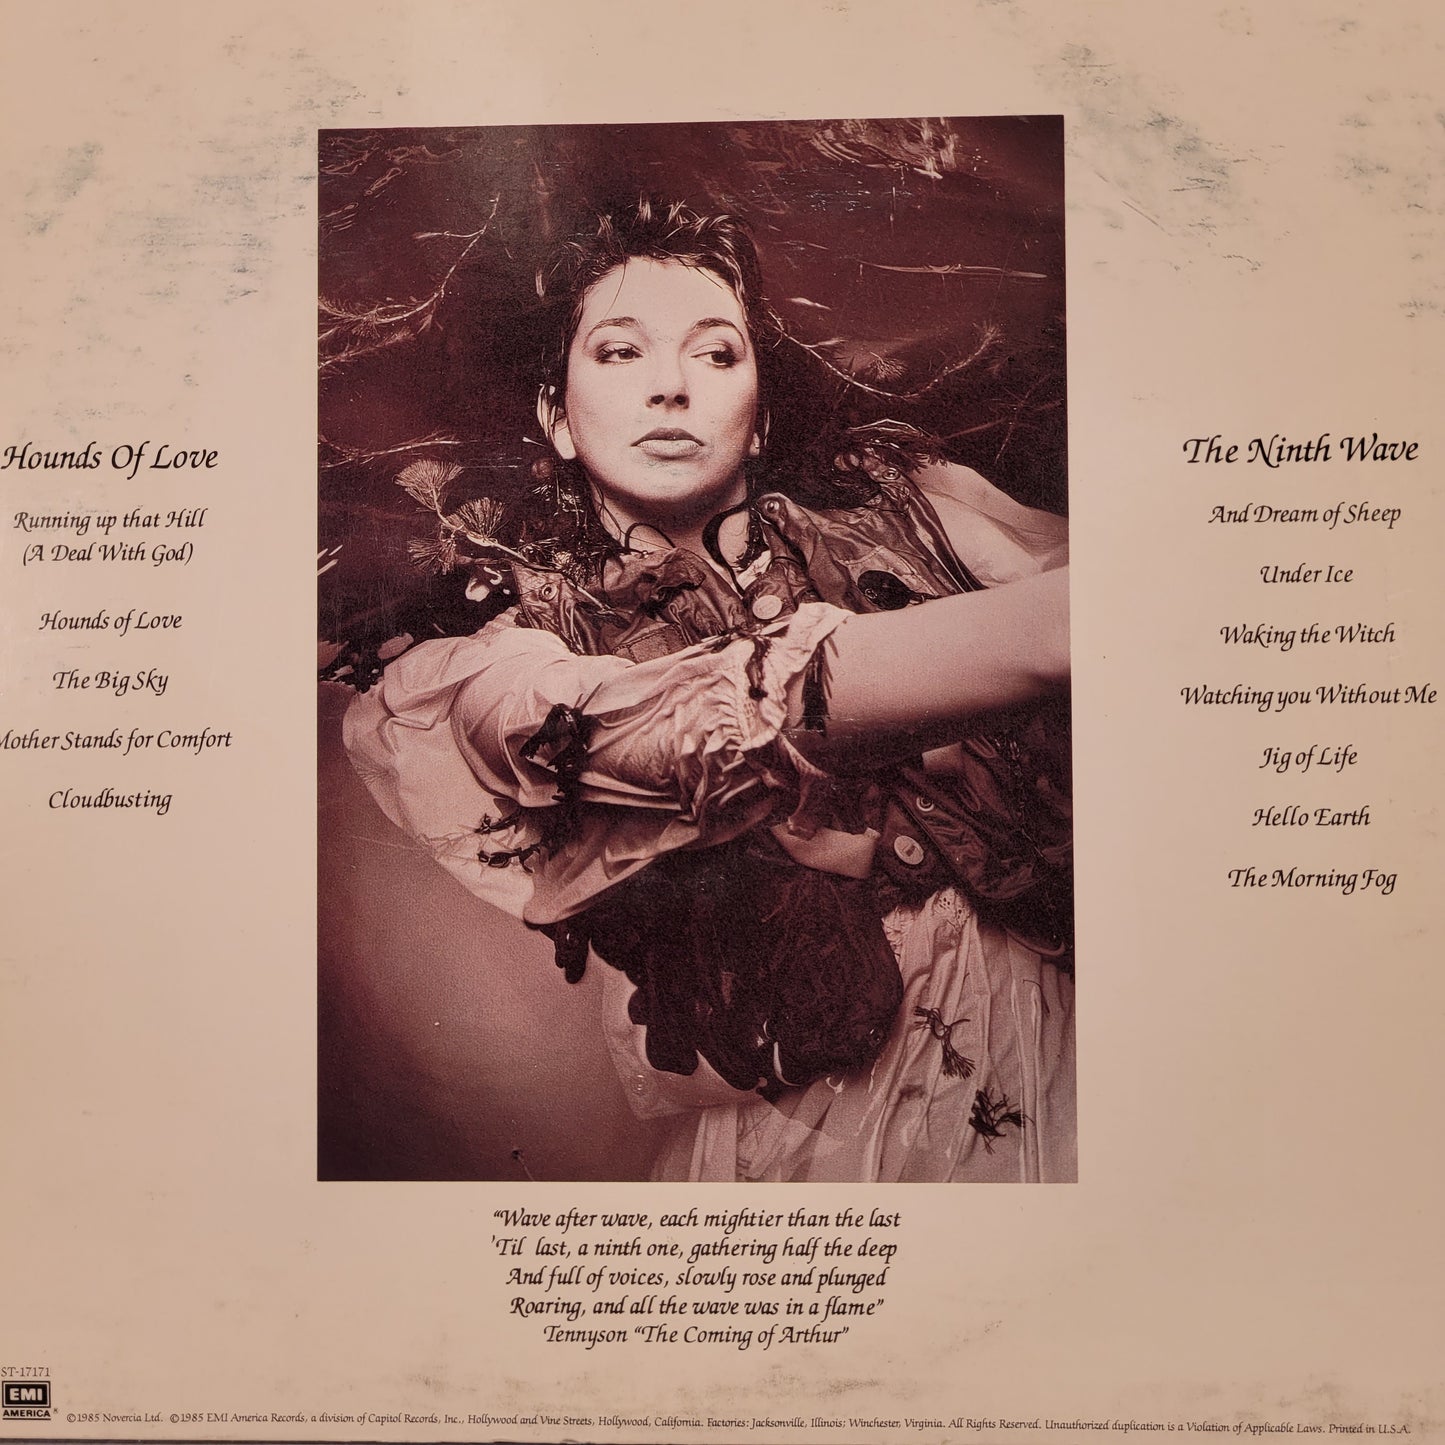 Original Press of Kate Bush Hounds of Love Vinyl Record Album Featured In Stranger Things Netflix